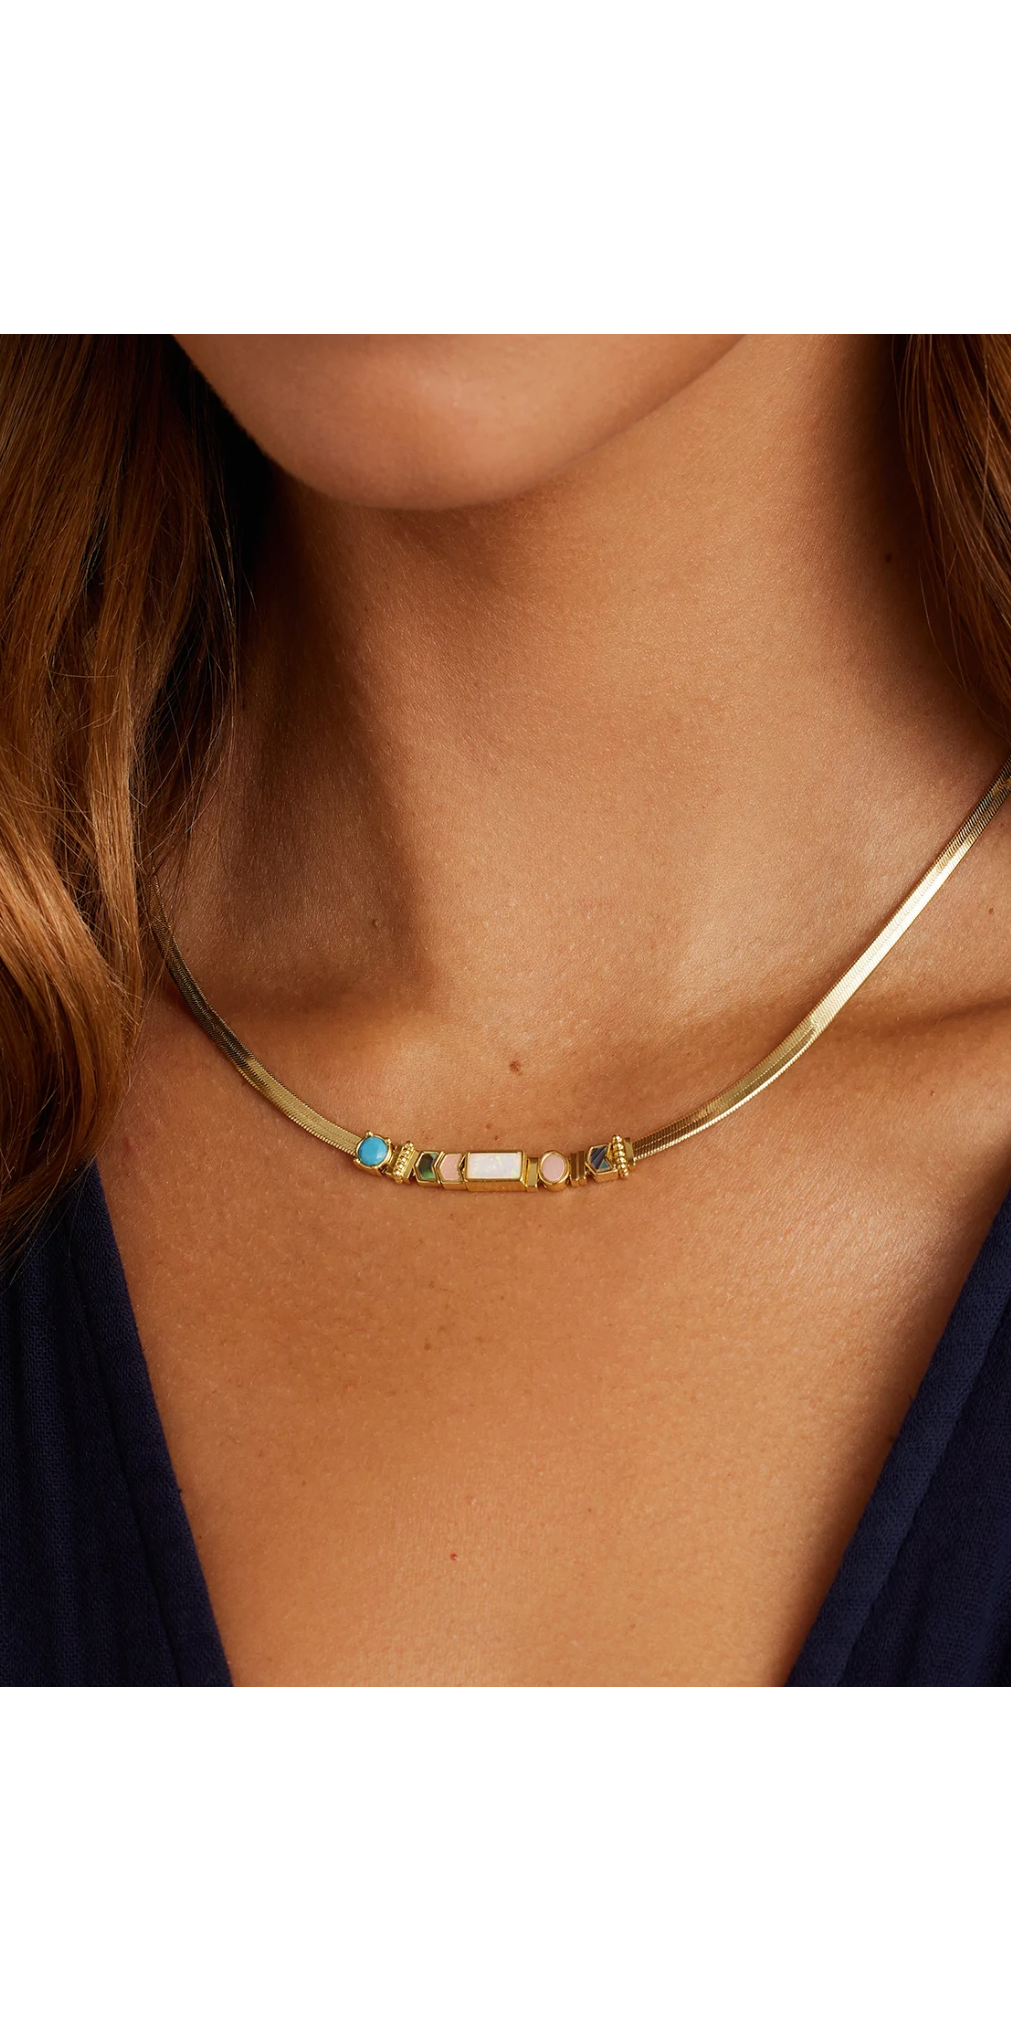 Gorjana Rose Interlocking Necklace in Gold | The Paper Store